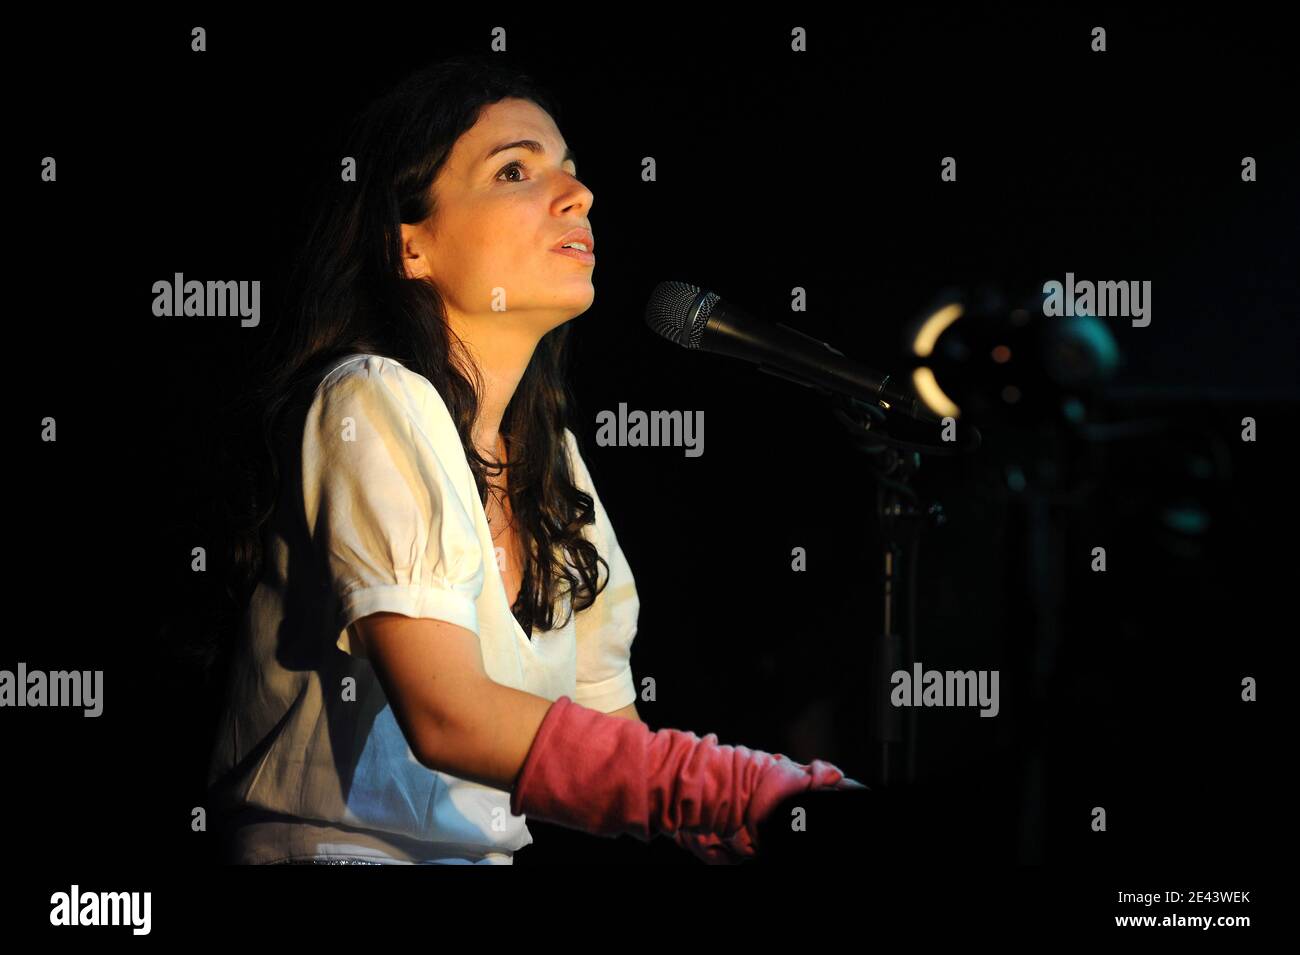 Yael Naim performs at the Montreux Jazz Festival, in Montreux, Switzerland on June 7, 2008. Photo by Loona/ABACAPRESS.COM Stock Photo